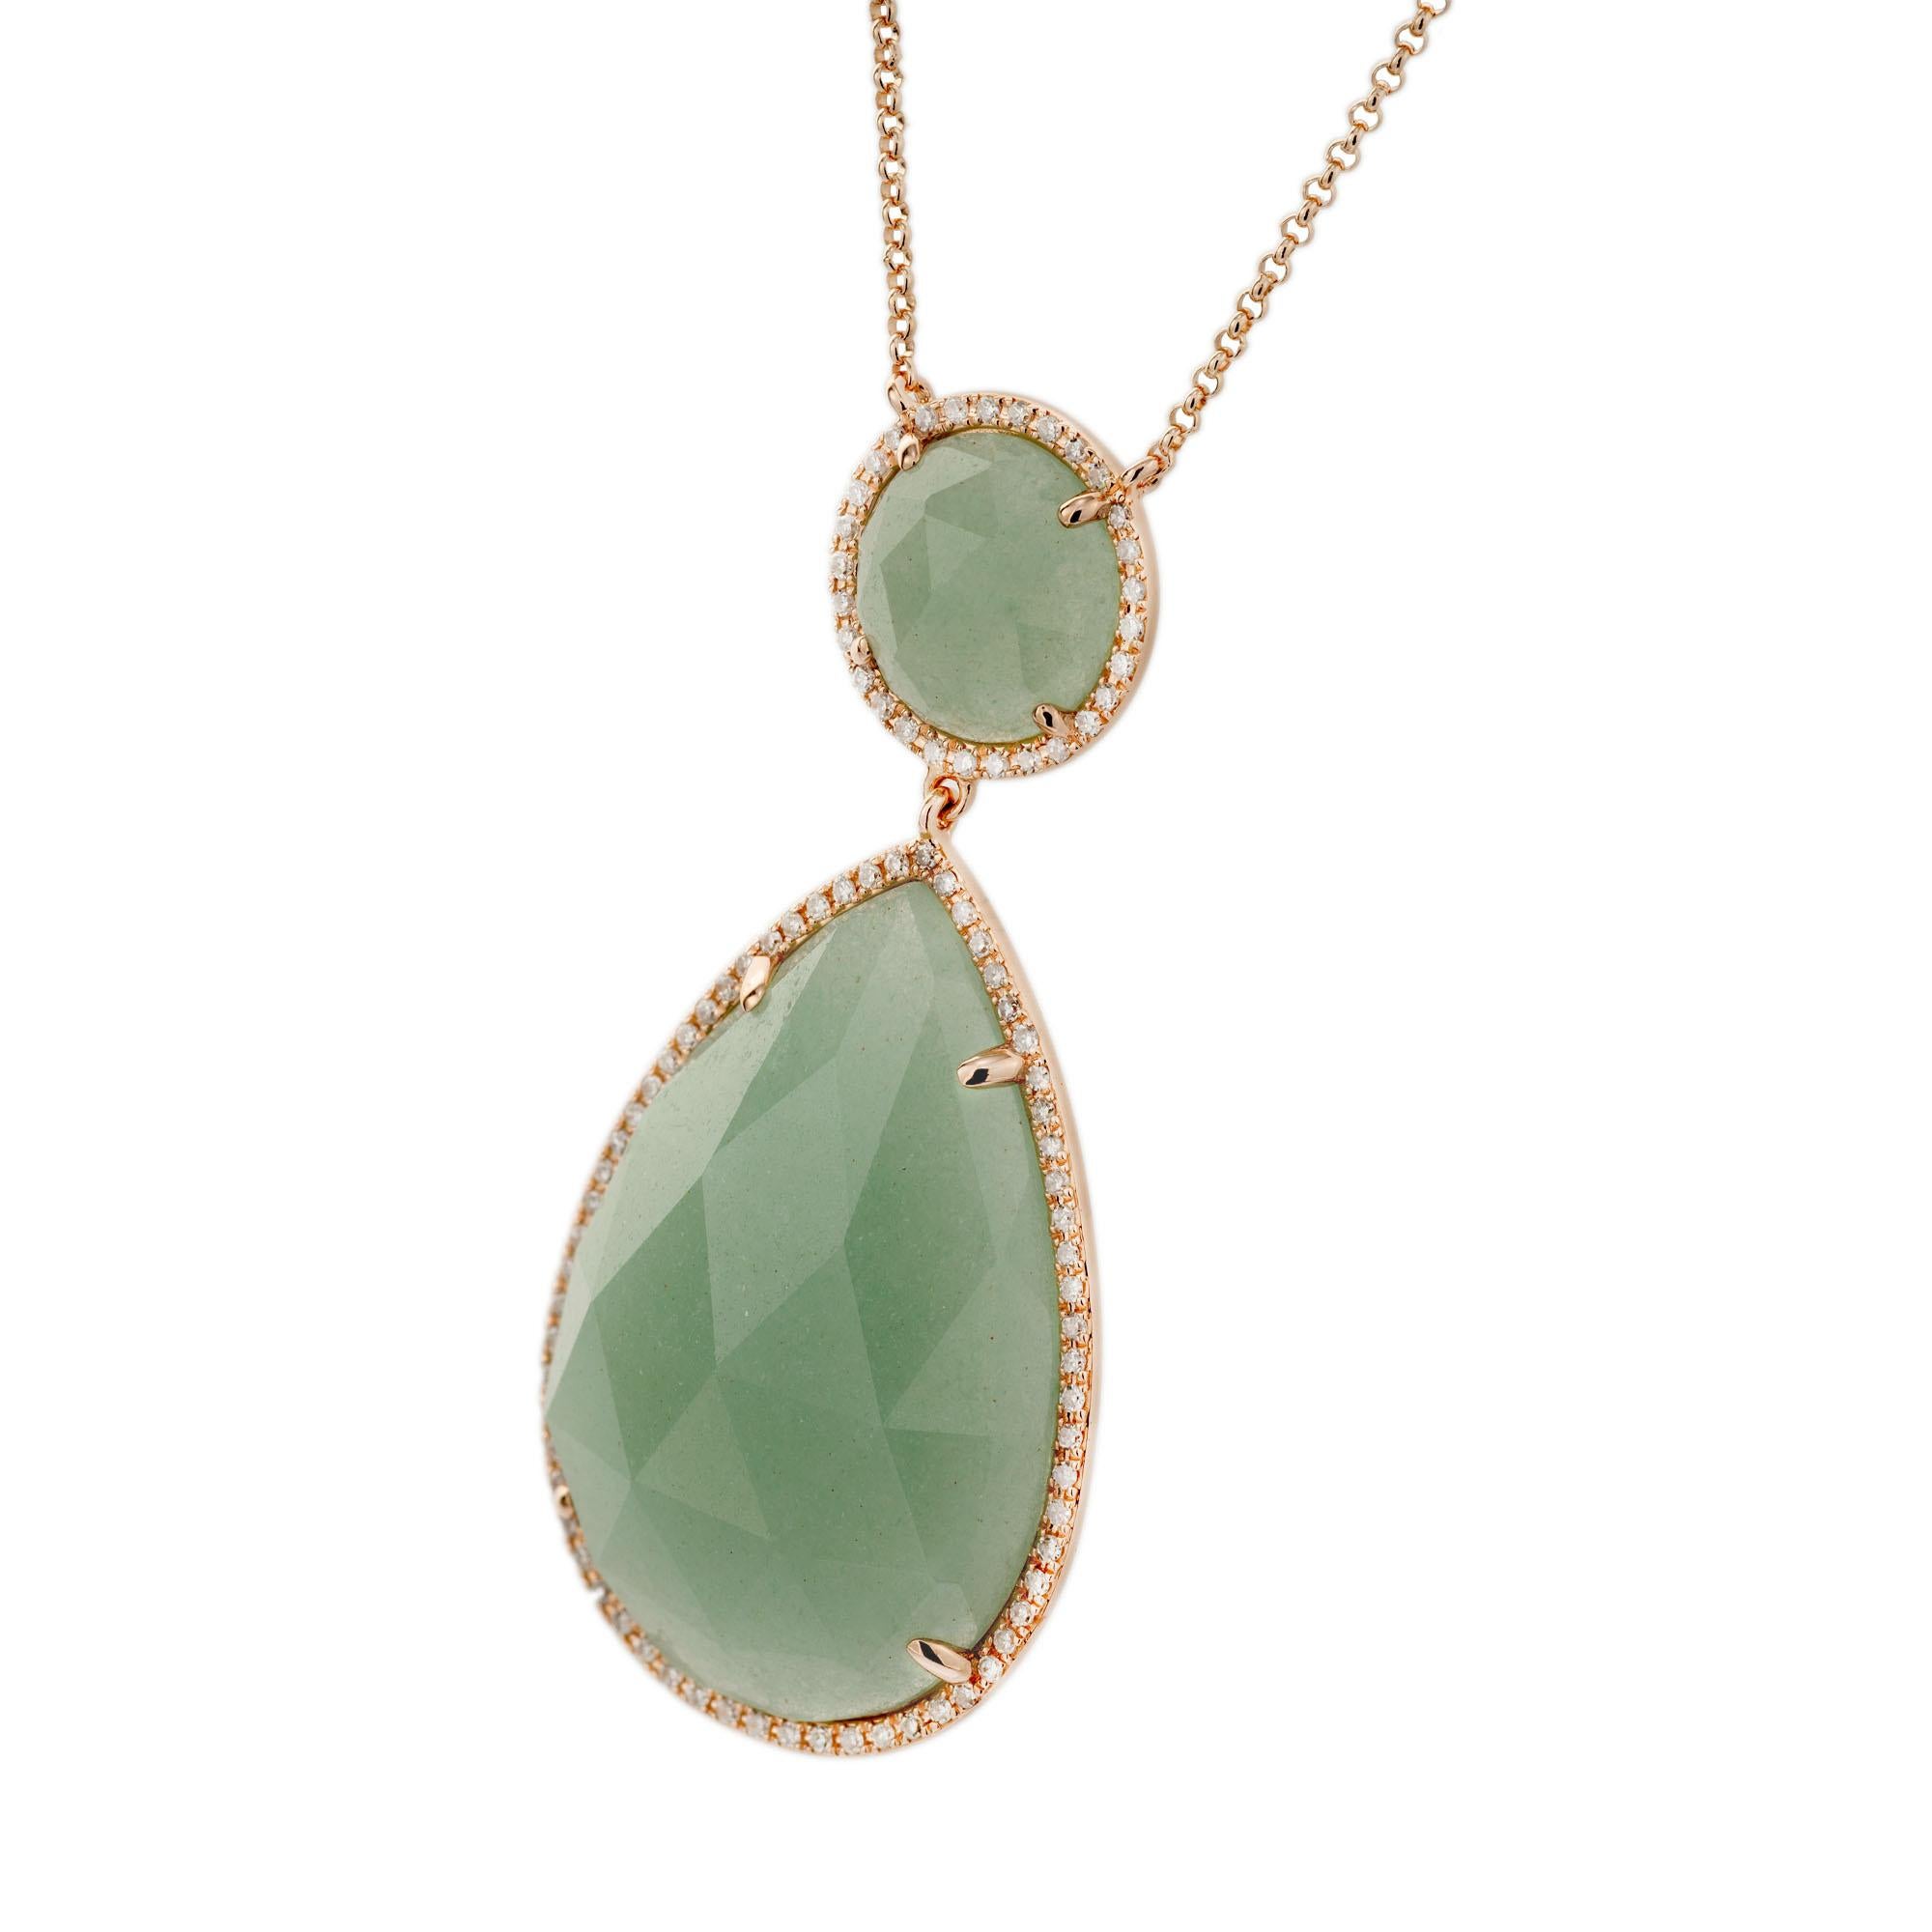 Aventurine and diamond pendant necklace. Pear and round shaped quartz, each with a halo of micro pave diamonds set in 14k Rose gold. 18 Inches long with shortening links.

1 pear shaped faceted cabochon green aventurine quartz, 27.4 x 18.4 x 6
1